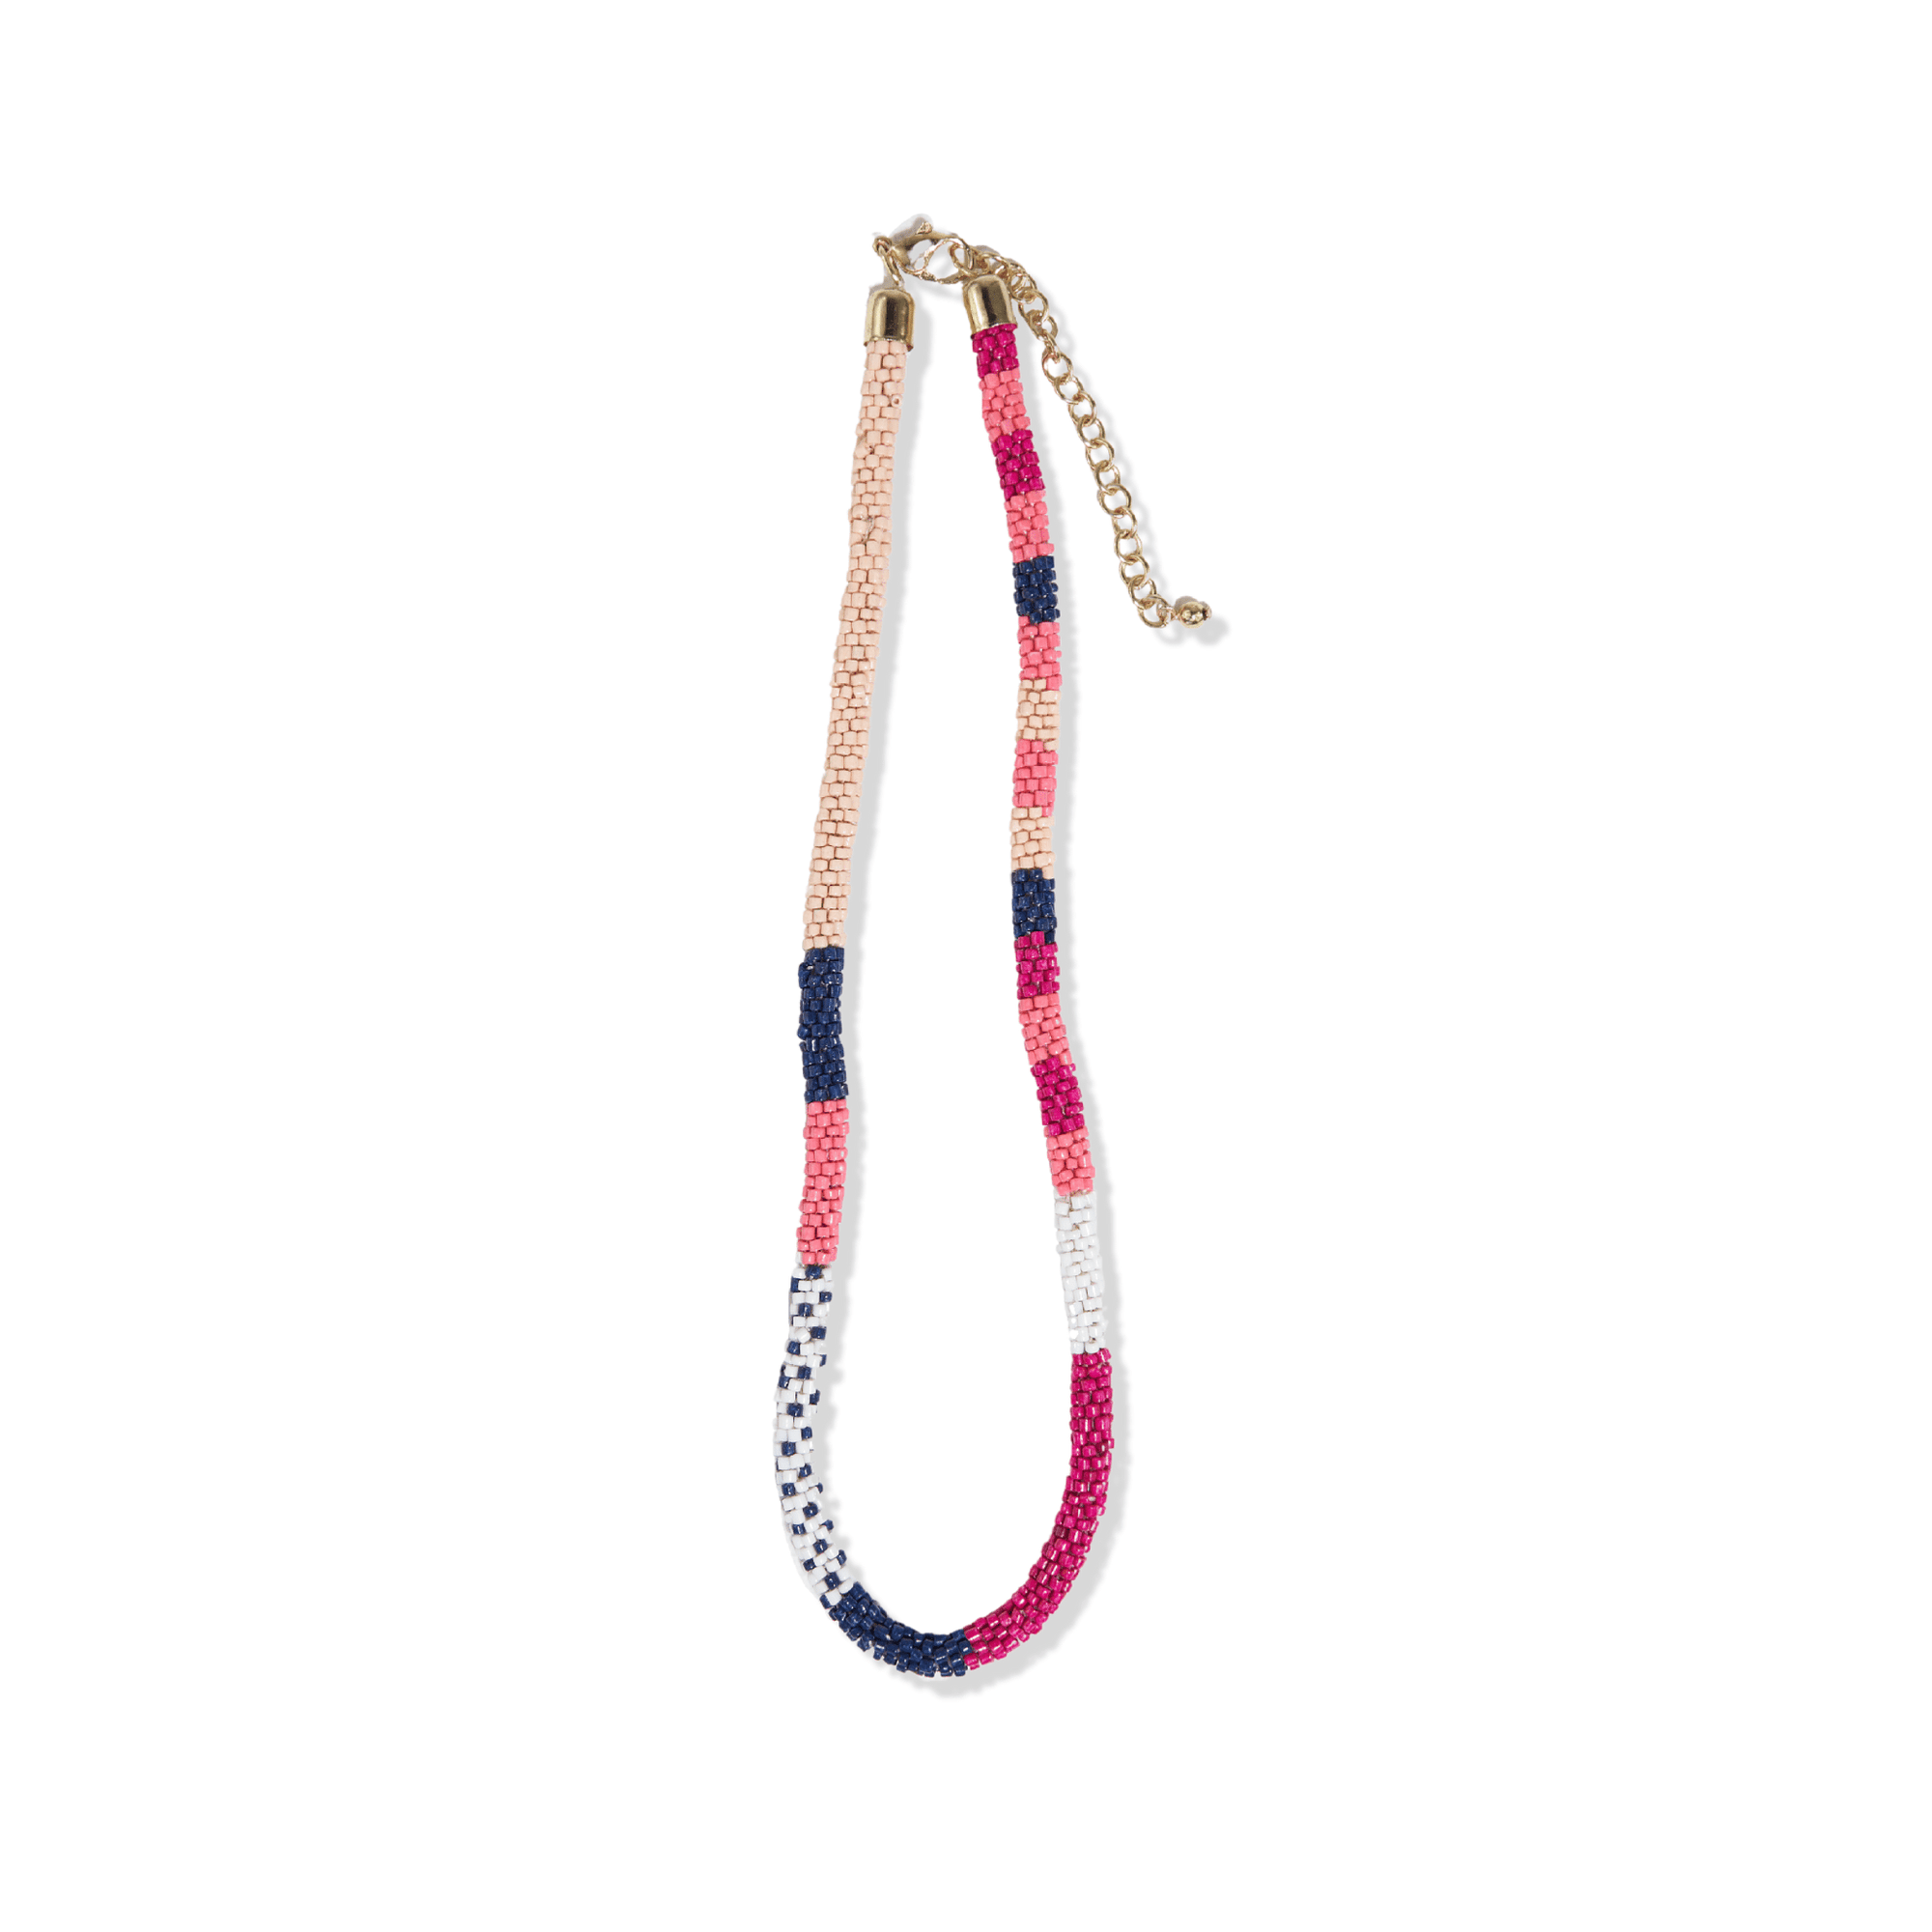 Maria Stripe and Dot Beaded Rope Necklace Pink and Navy Wholesale